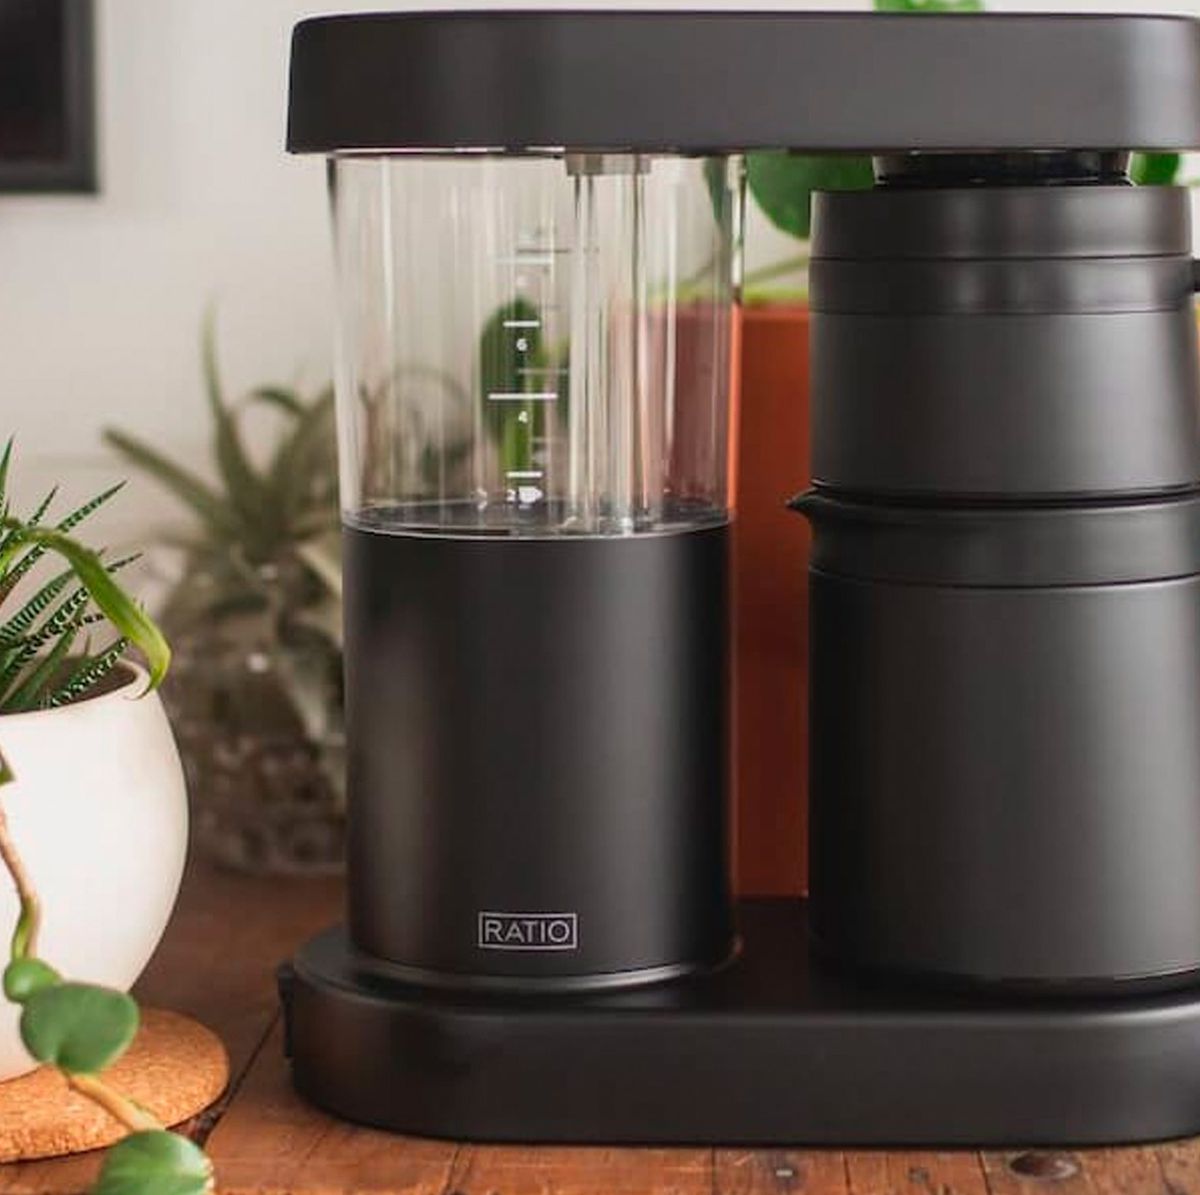 The Ratio Six Coffee Maker Is the SCA's Latest Certified Home Brewer